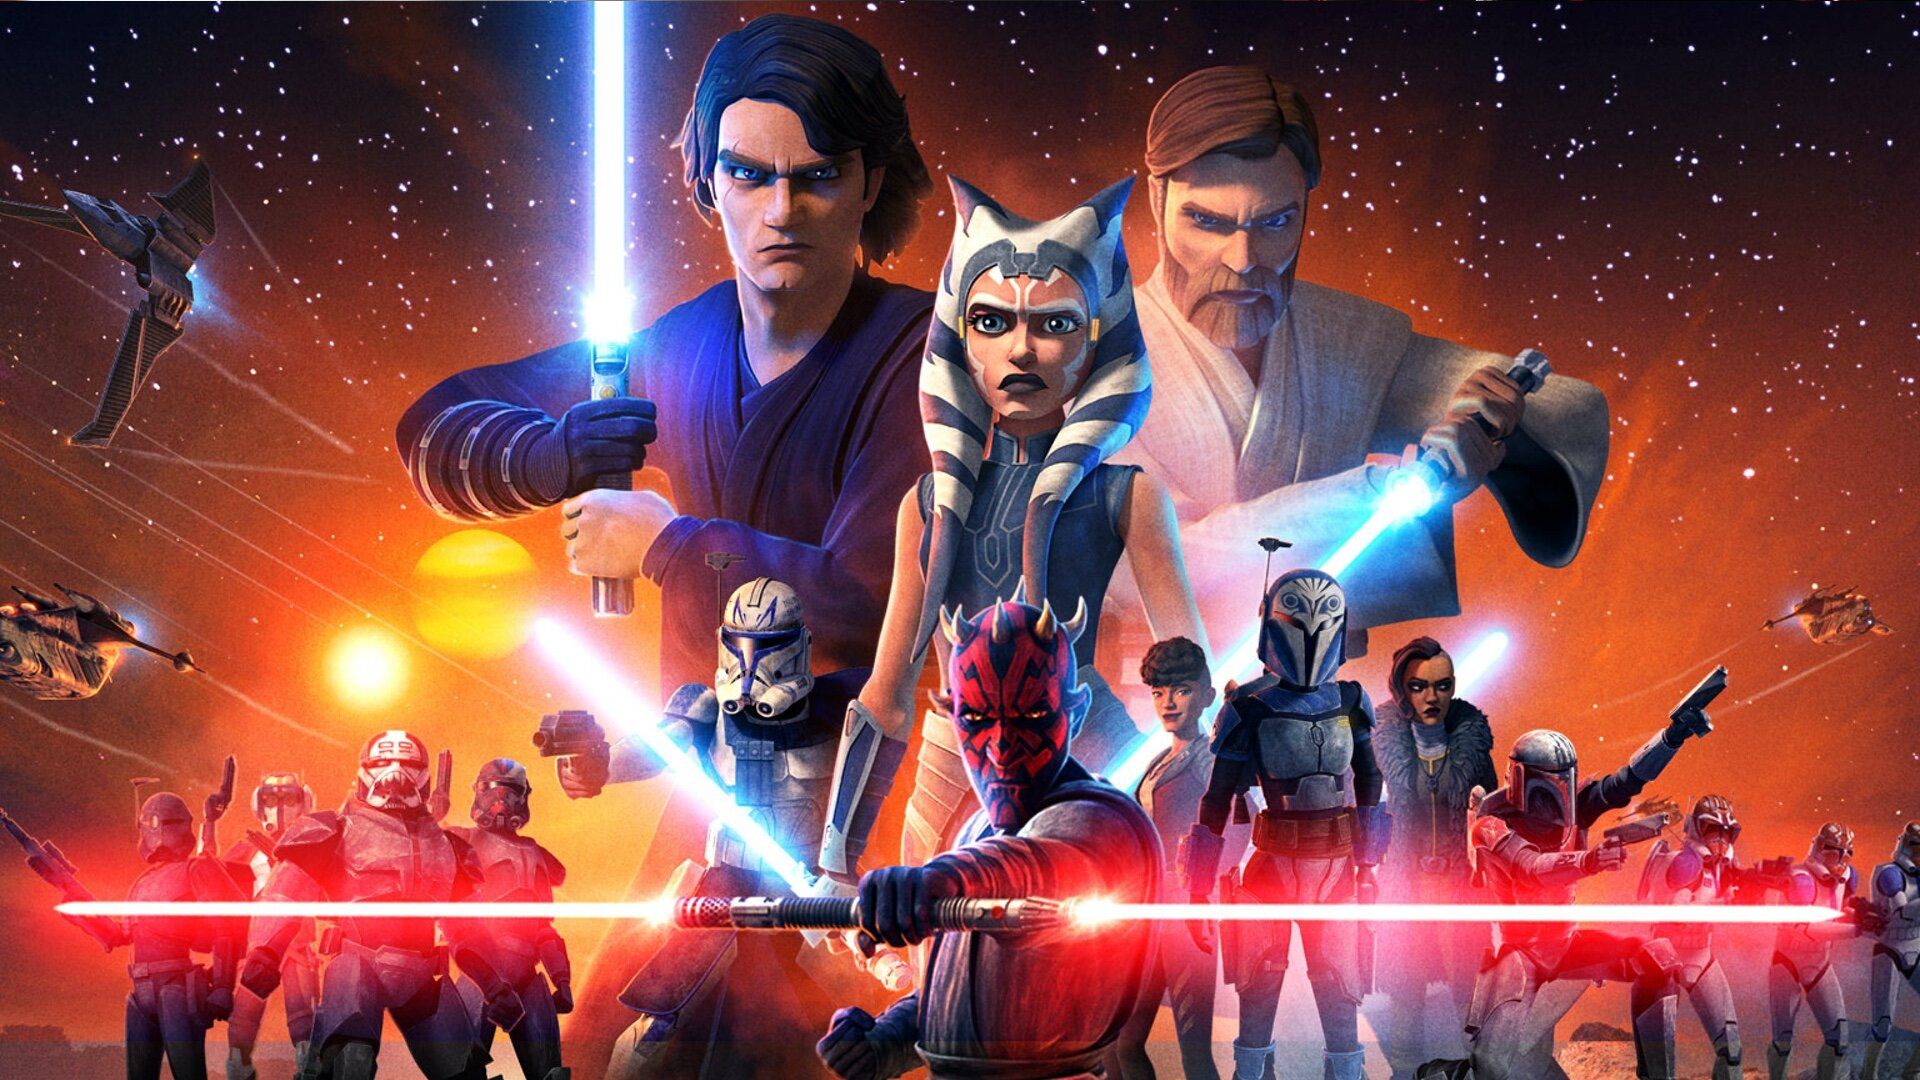 If You Haven't Watched STAR WARS: THE CLONE WARS Watch It! The Final Season Is Mind Blowingly Awesome!